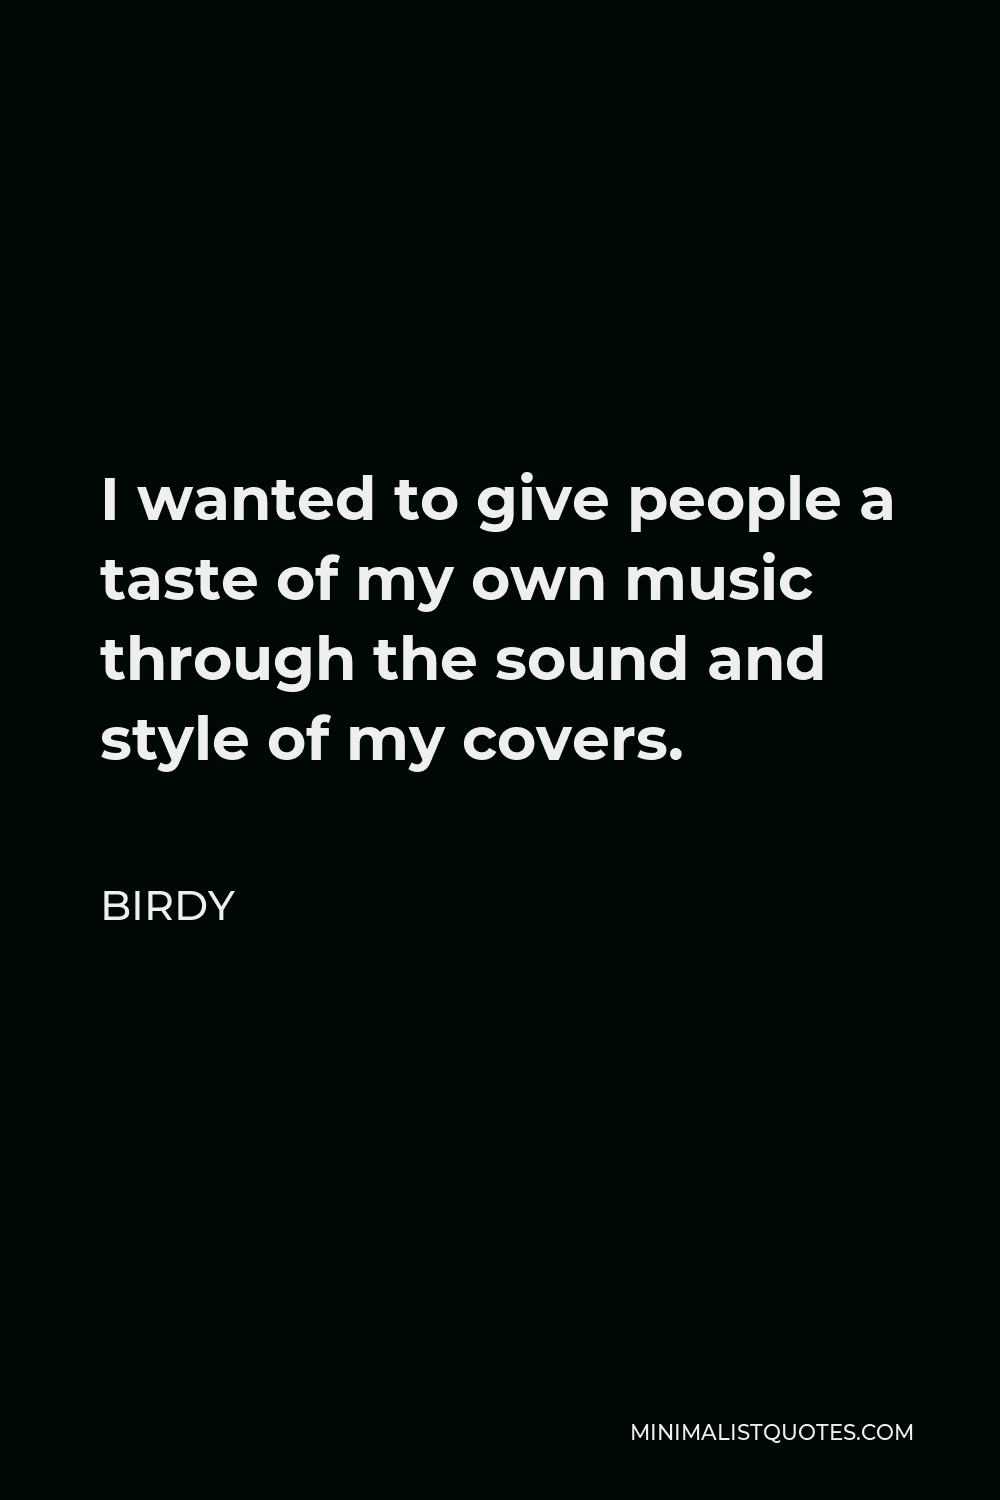 Birdy Quote - I wanted to give people a taste of my own music through the sound and style of my covers.